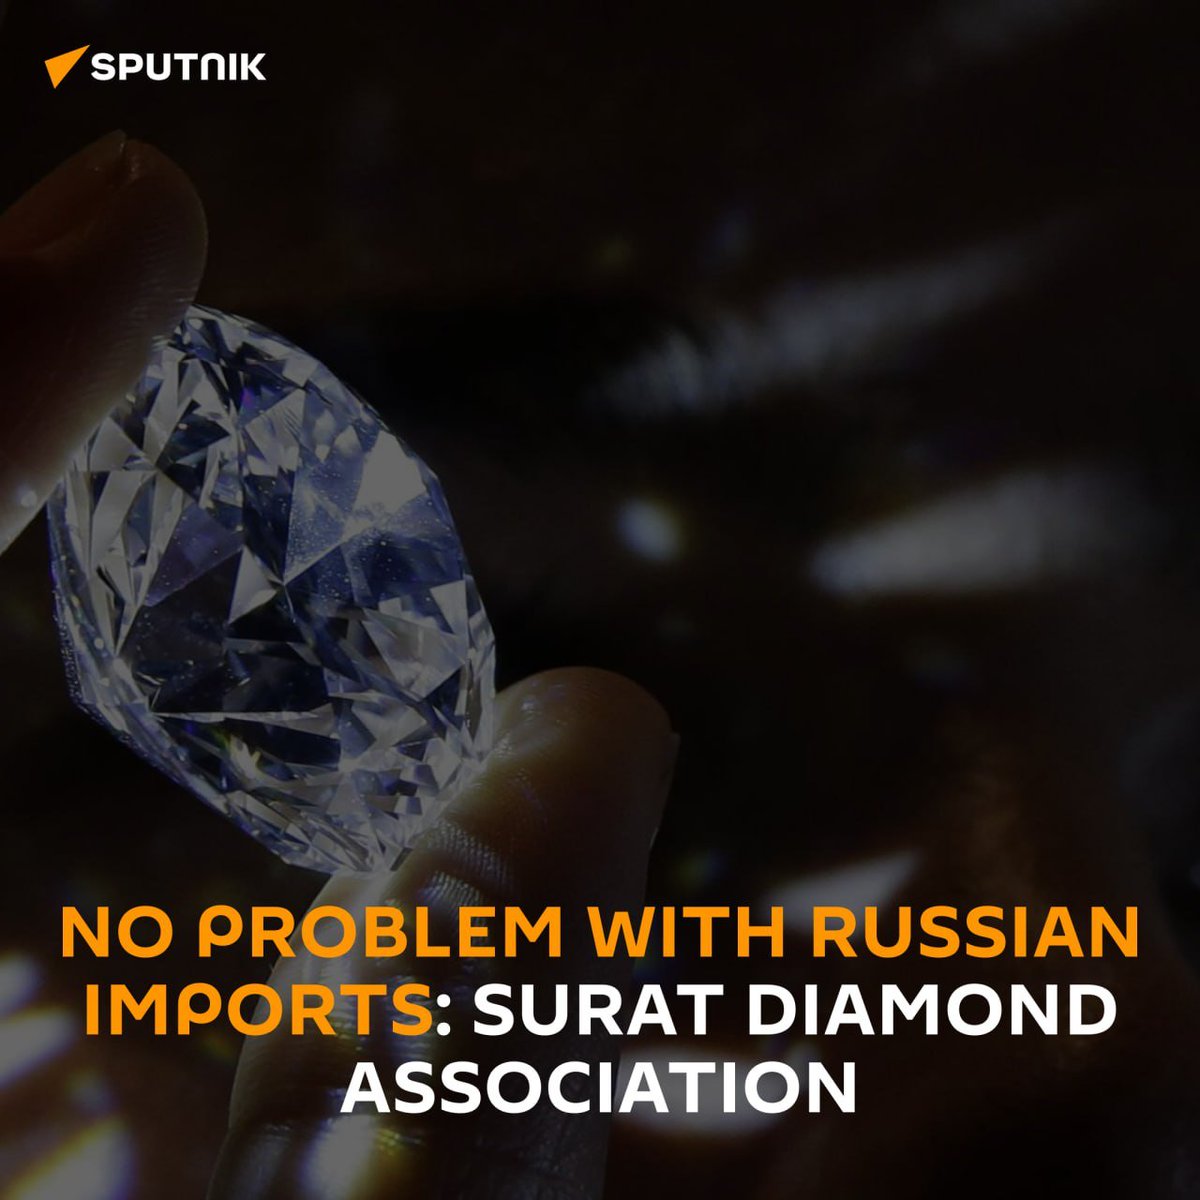 💎G7 Doesn’t Have Technology to Verify Origin of Diamonds, Says Surat Diamond Association

Despite Western plans to route the global diamond supplies through Belgium to verify if its Russian, #G7 have no means of detecting if the diamonds came from Russia, Africa or Canada,…